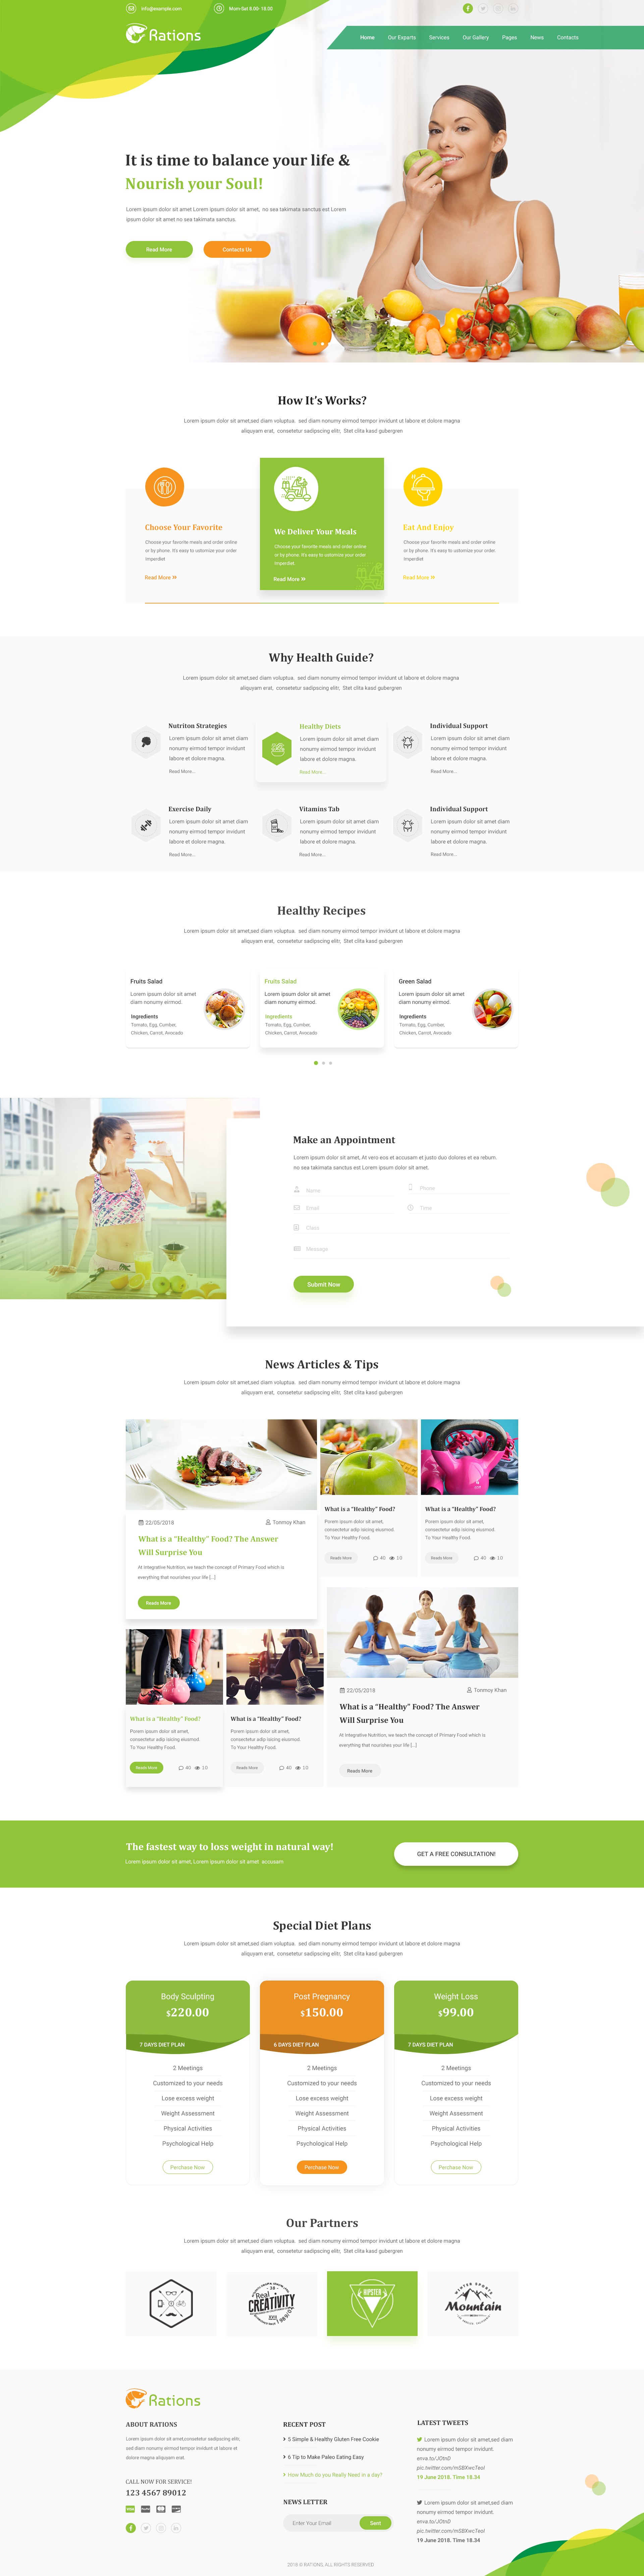 Ration PSD - Weight Loss | Nutrition Health Care & Diet Template - 1